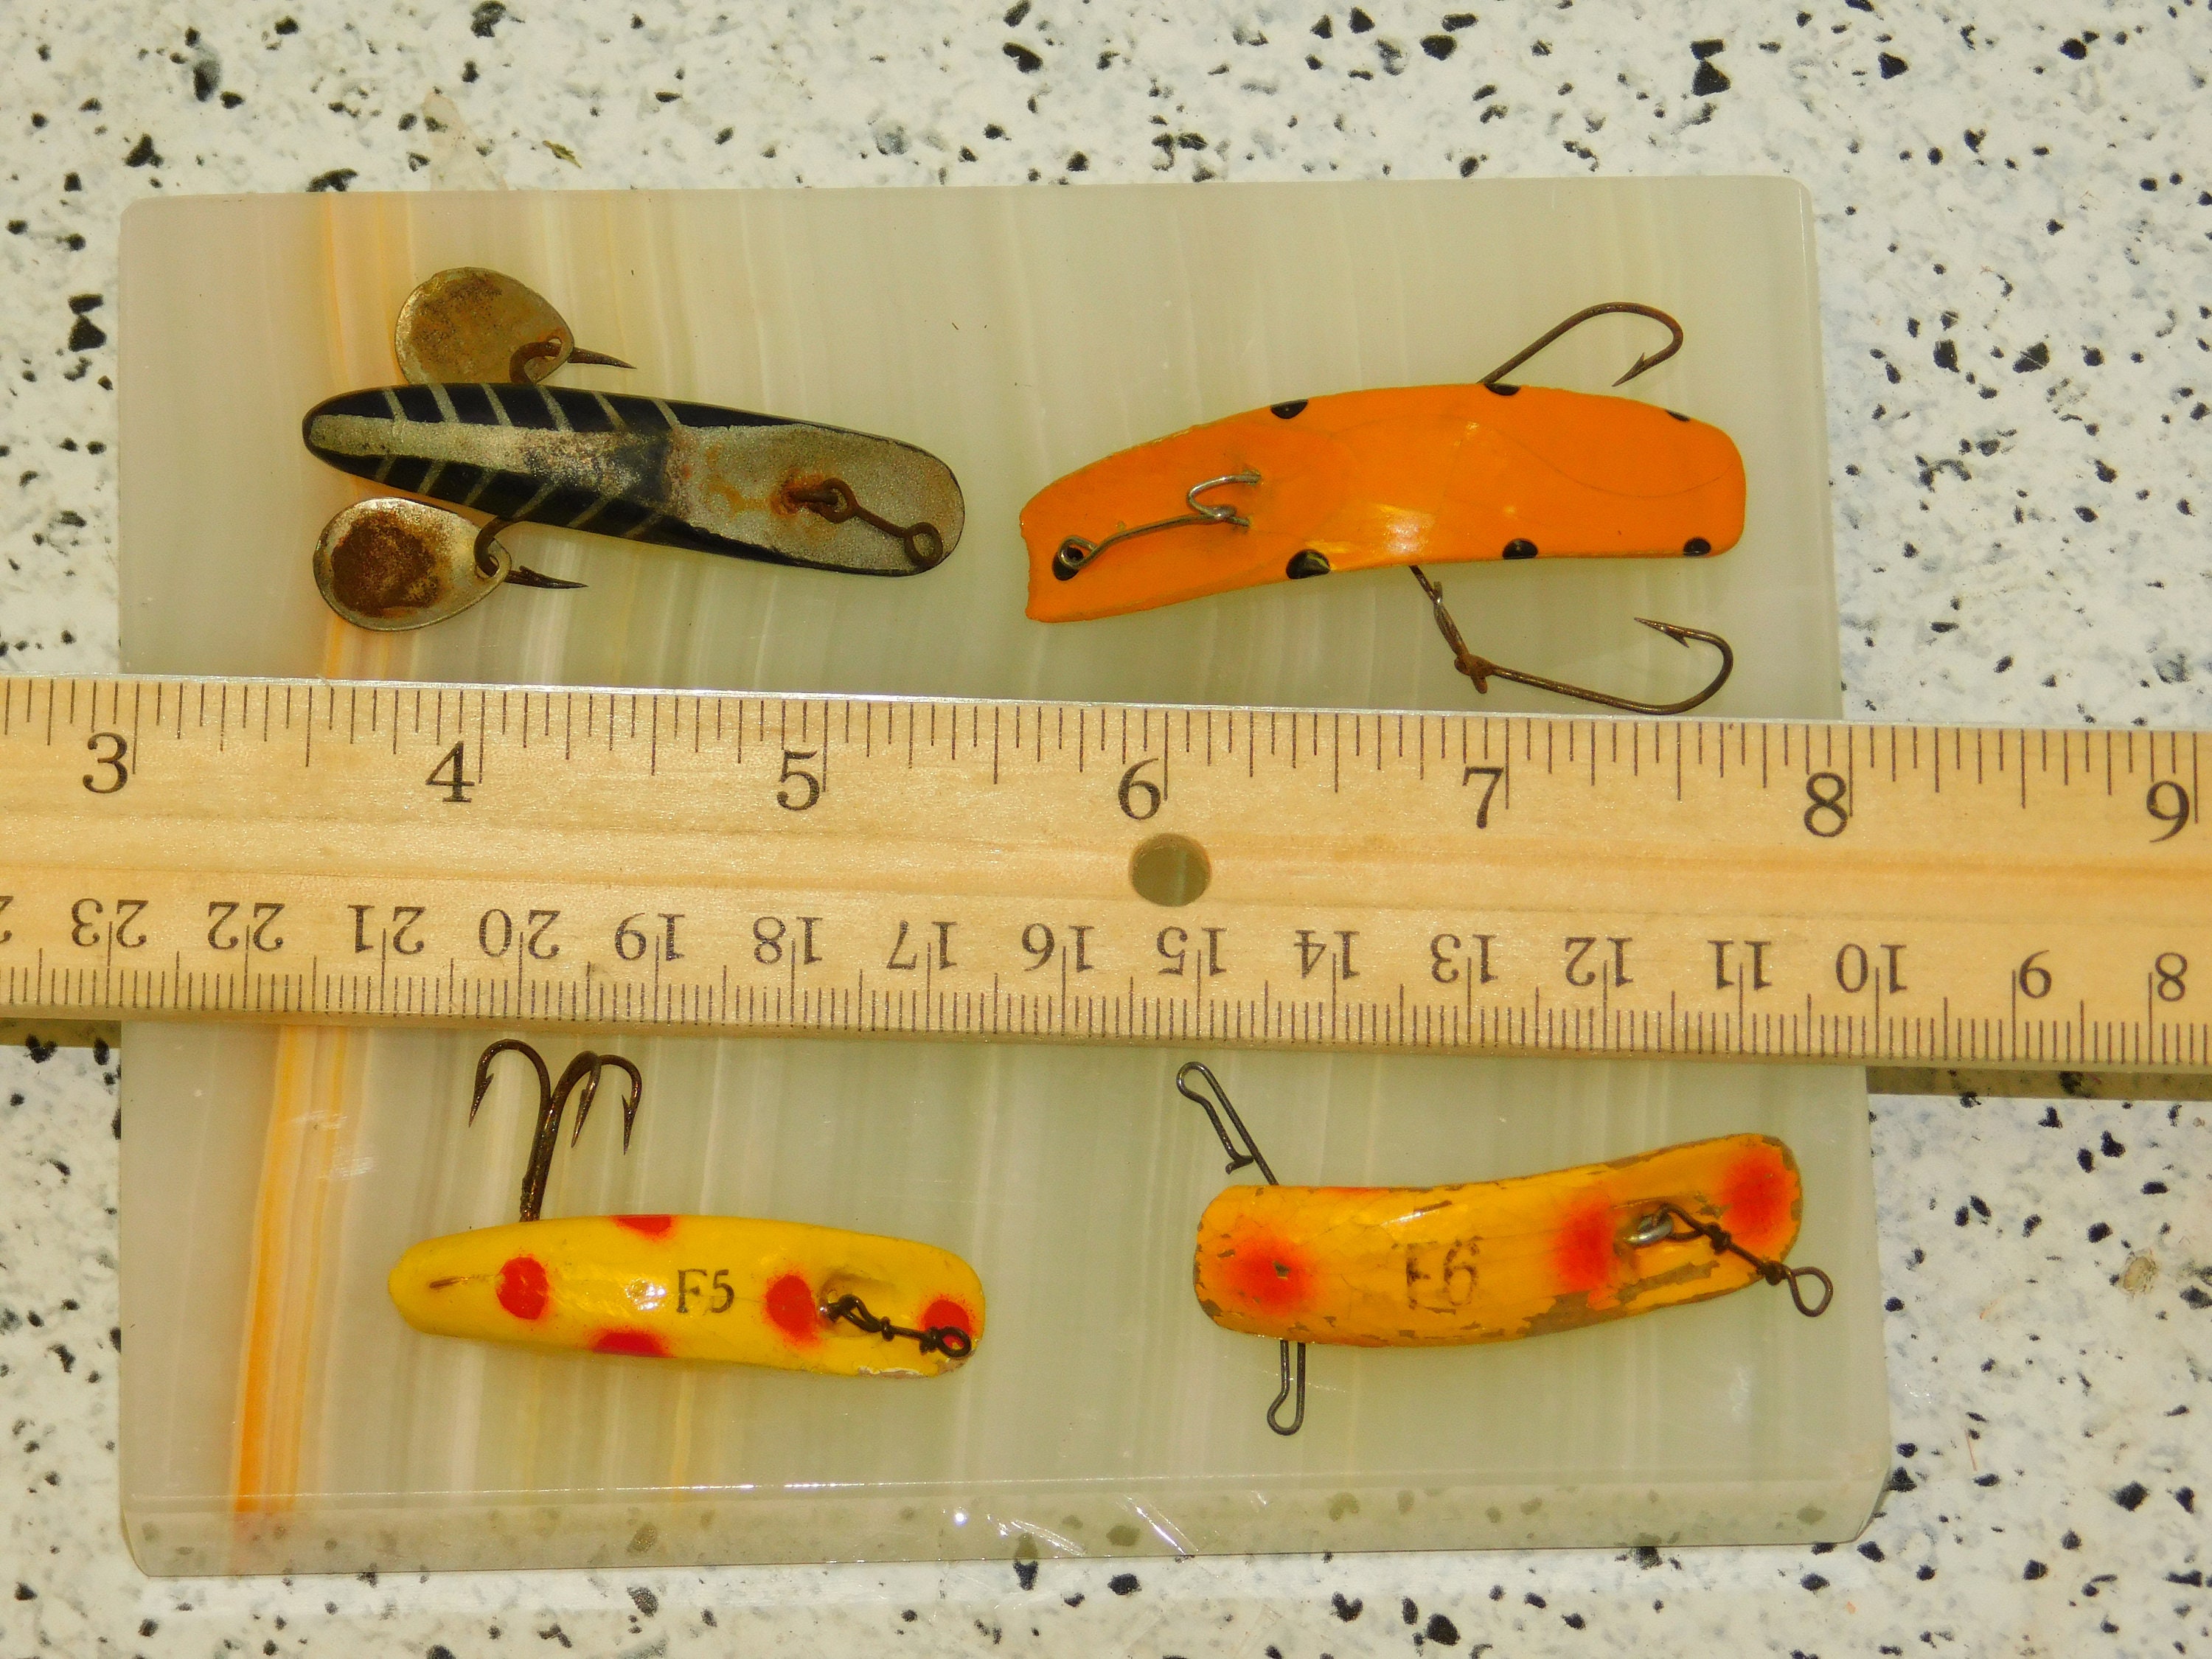 VTG Tackle Box Fishing Lures & Accessories Lot (12) w/ Sport